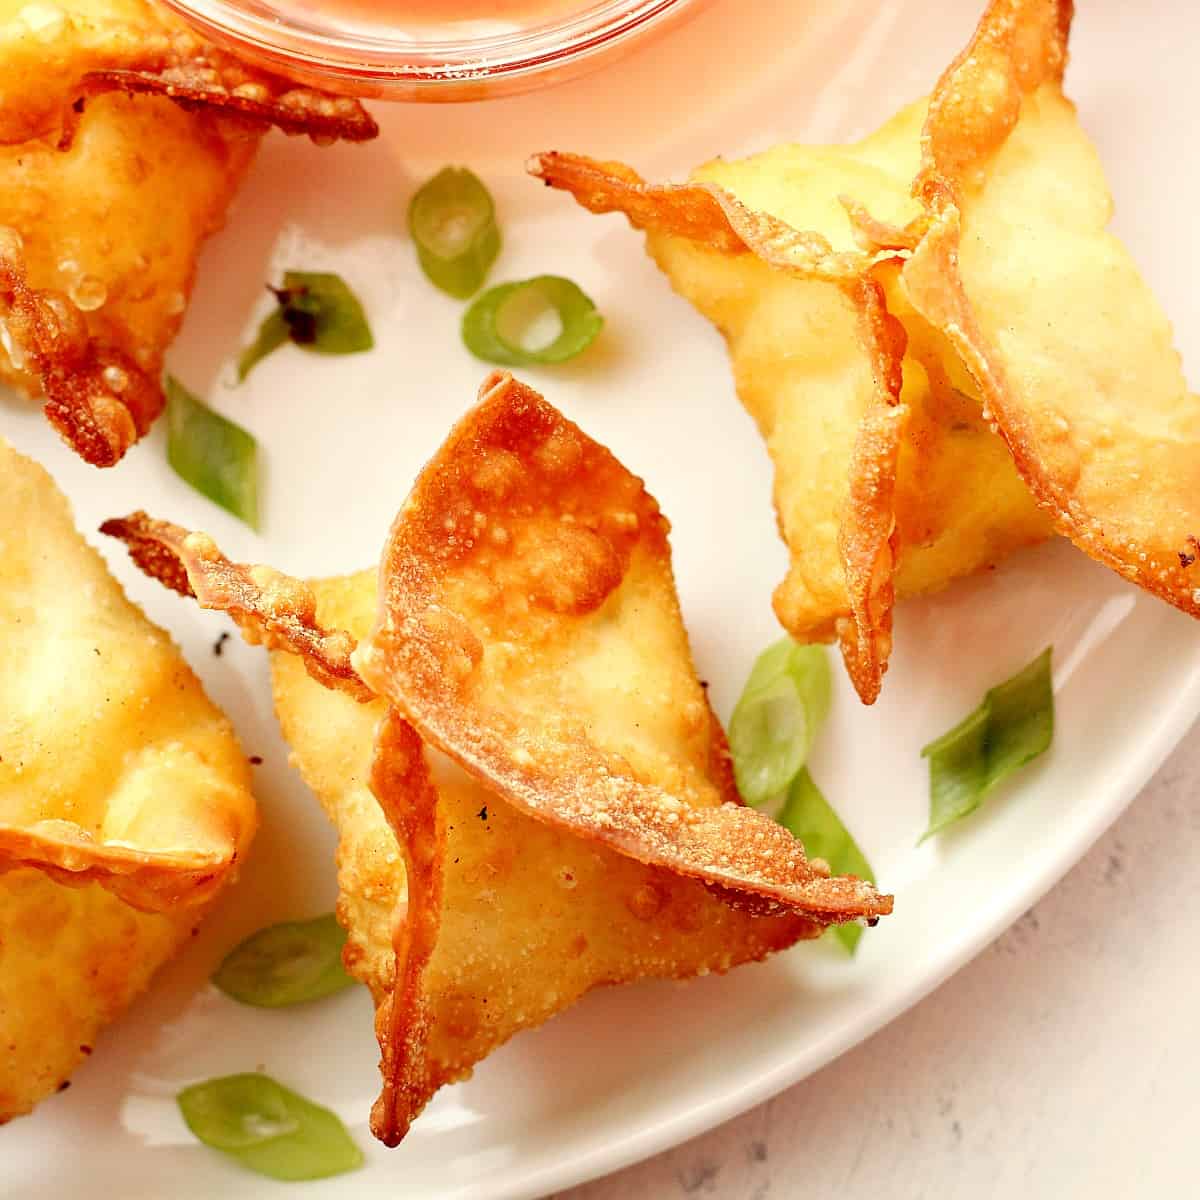 Wontons with dipping sauce on a plate.